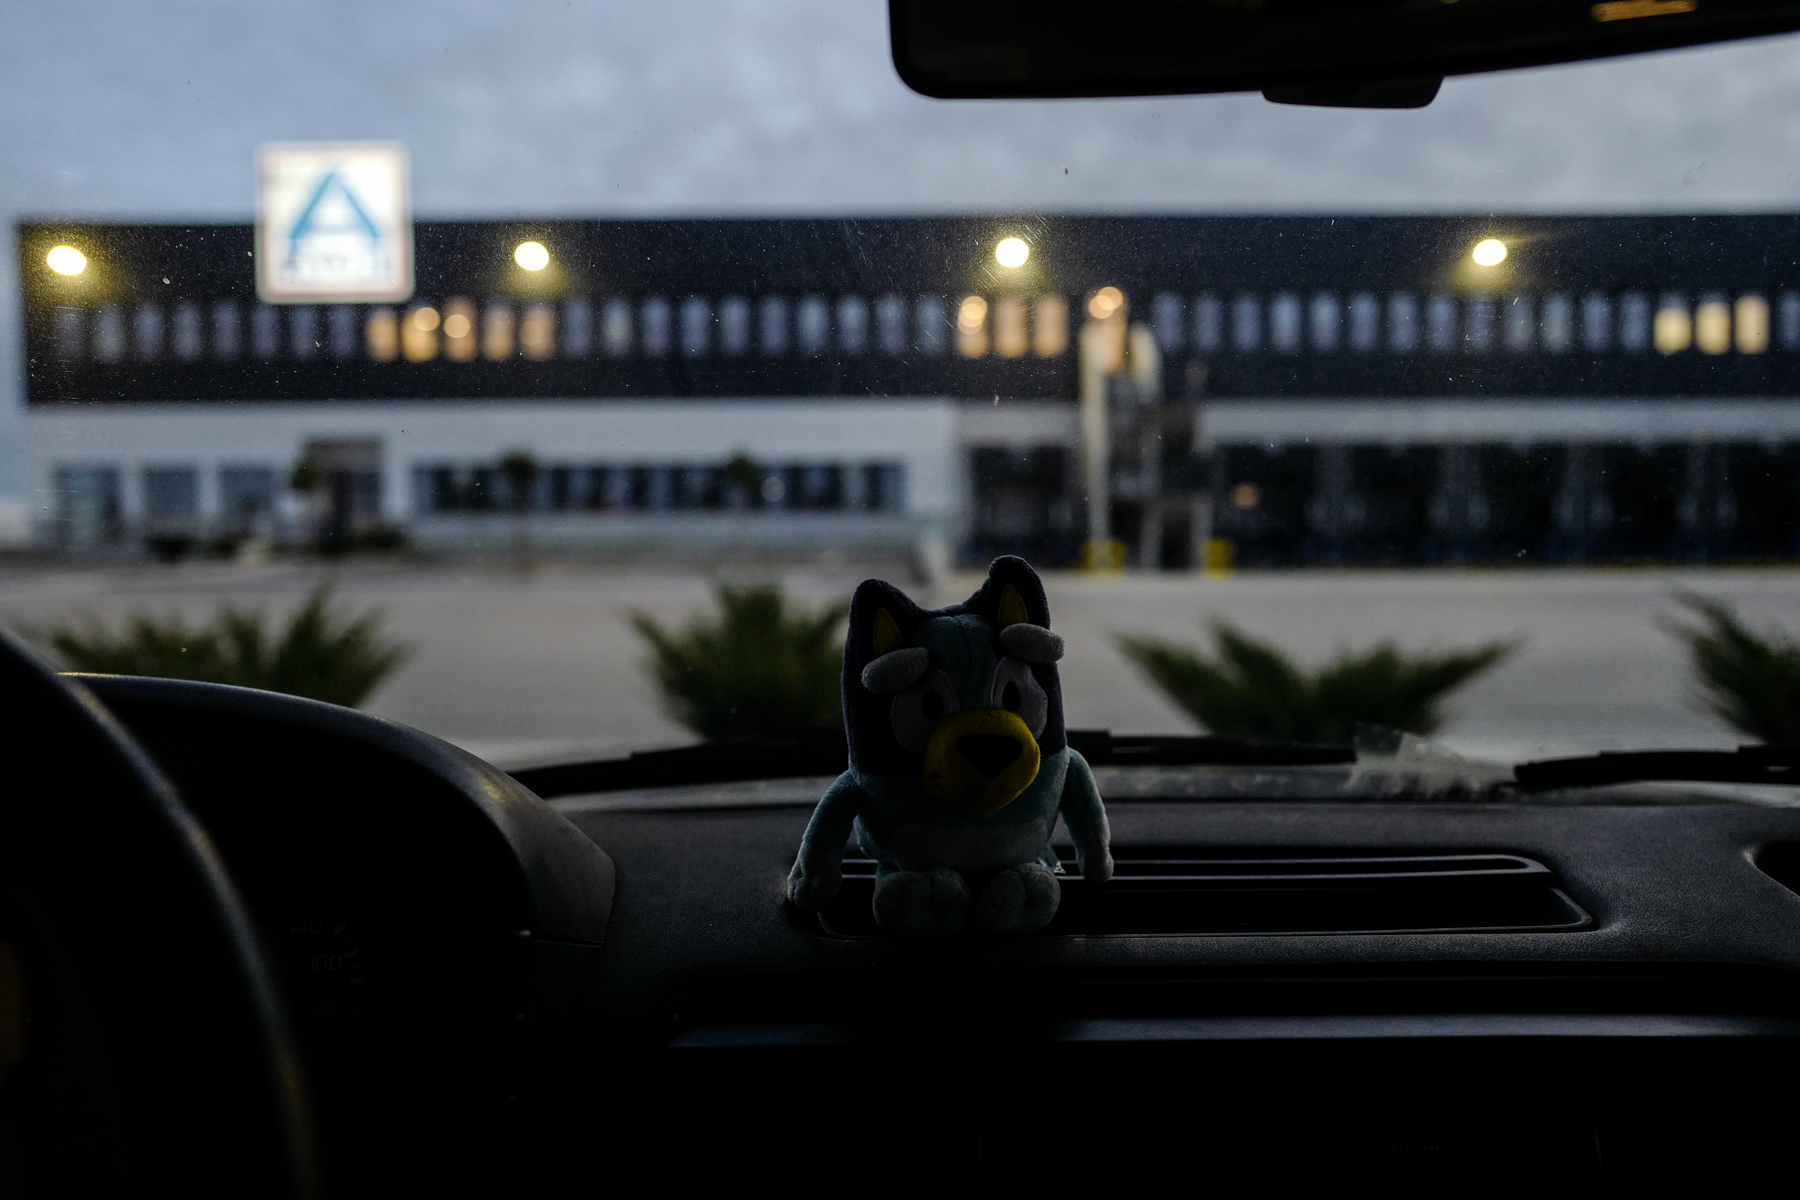 A small Bluey toy sits on the dashboard of a car, with a blurred building and lights in the background during dusk or early evening.